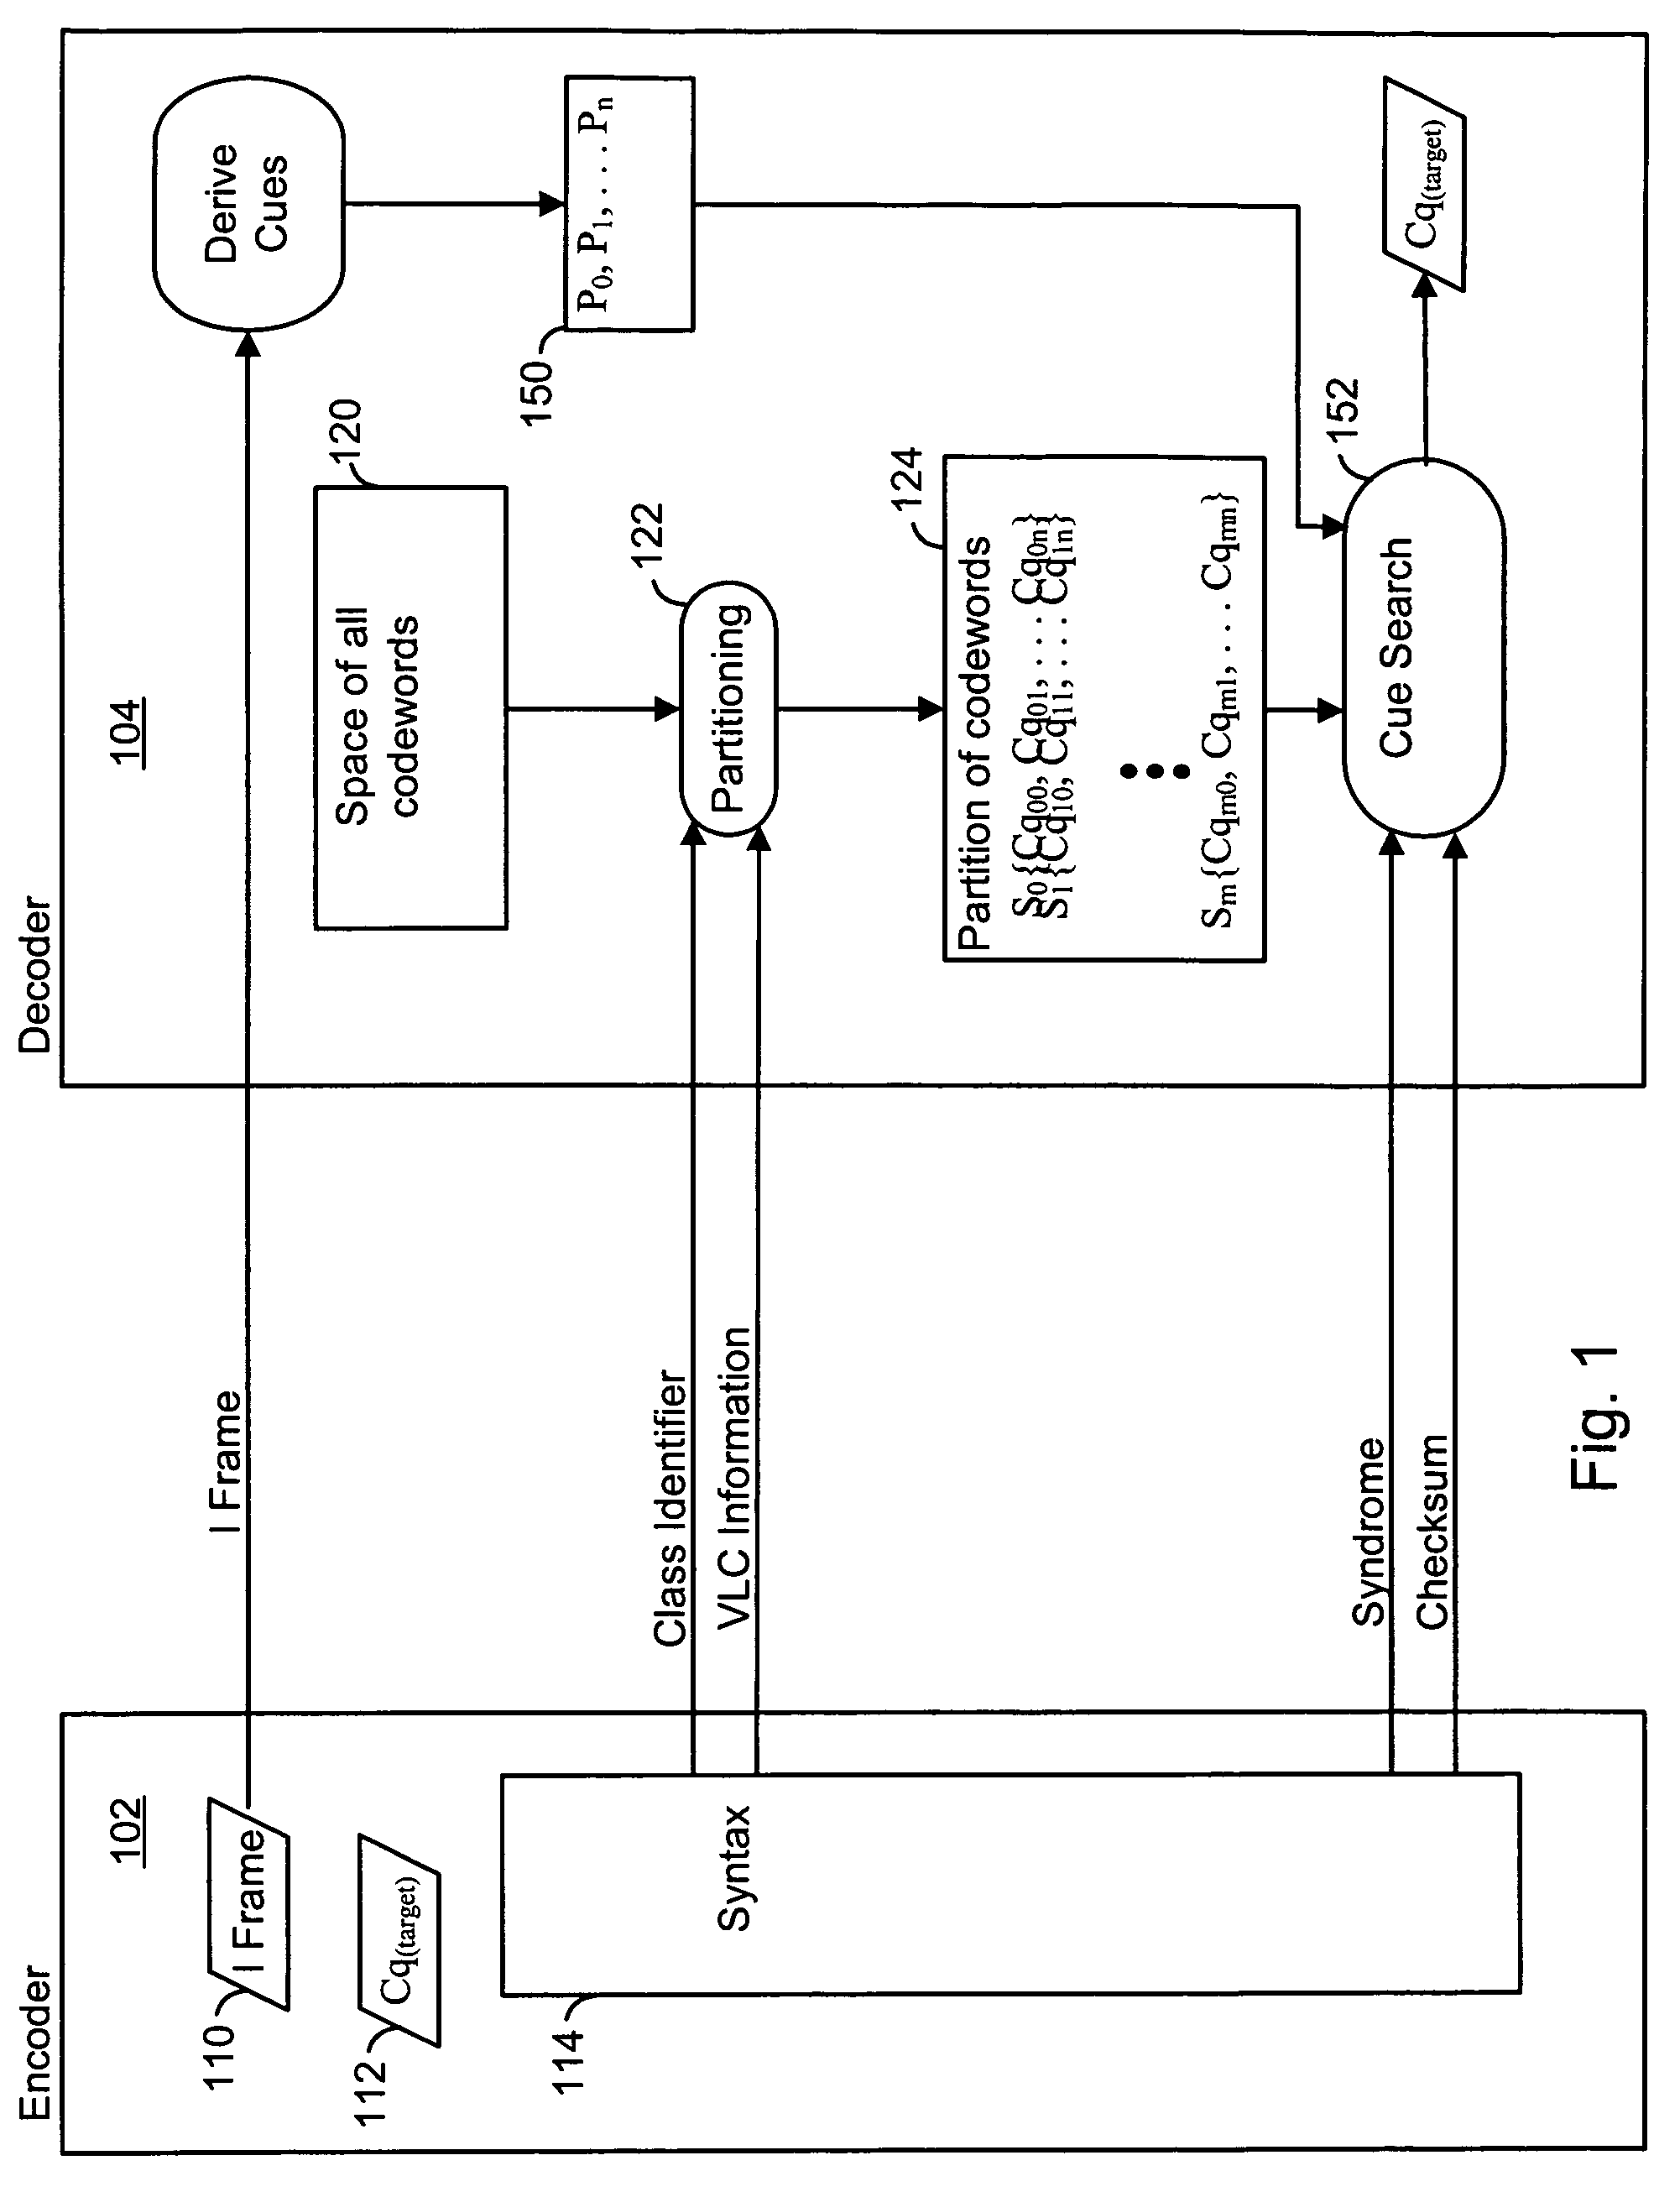 Encoding and decoding of digital data using cues derivable at a decoder